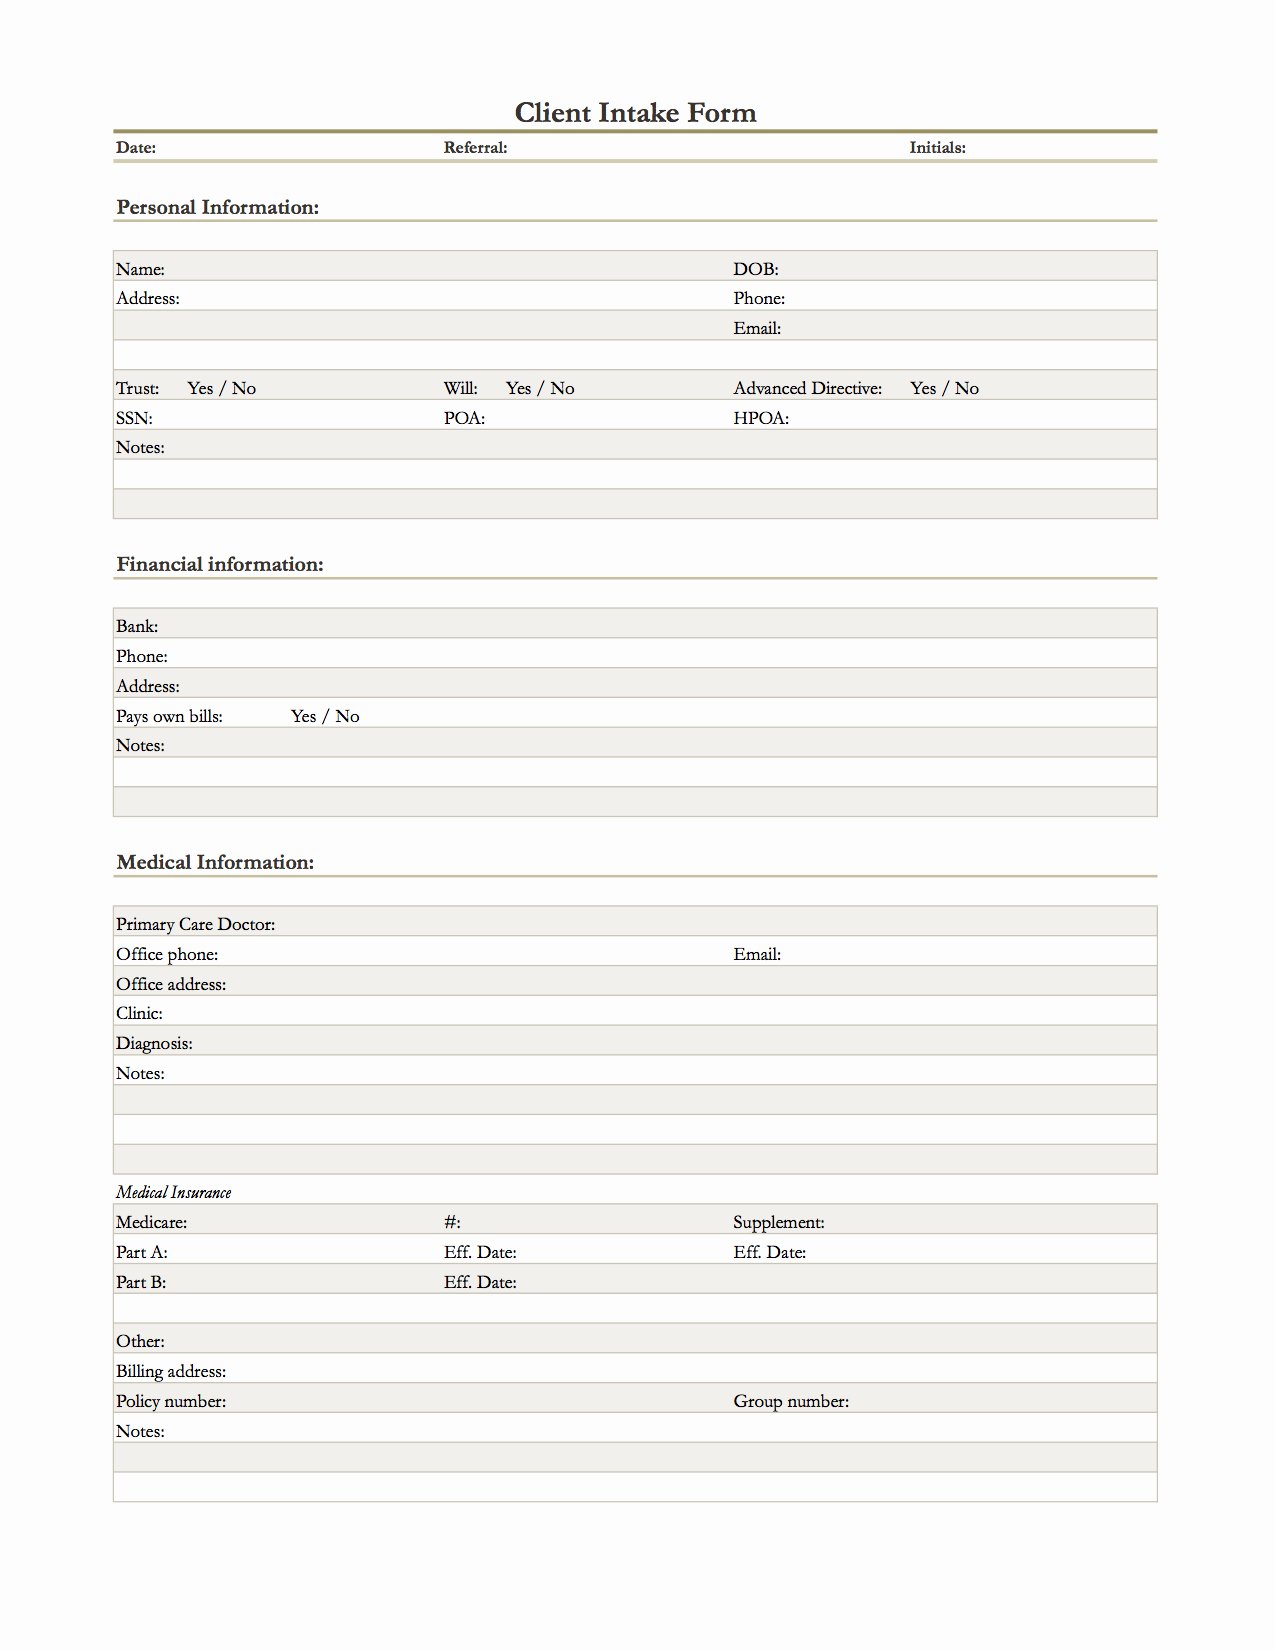 Client Information form Template Awesome Operational Templates